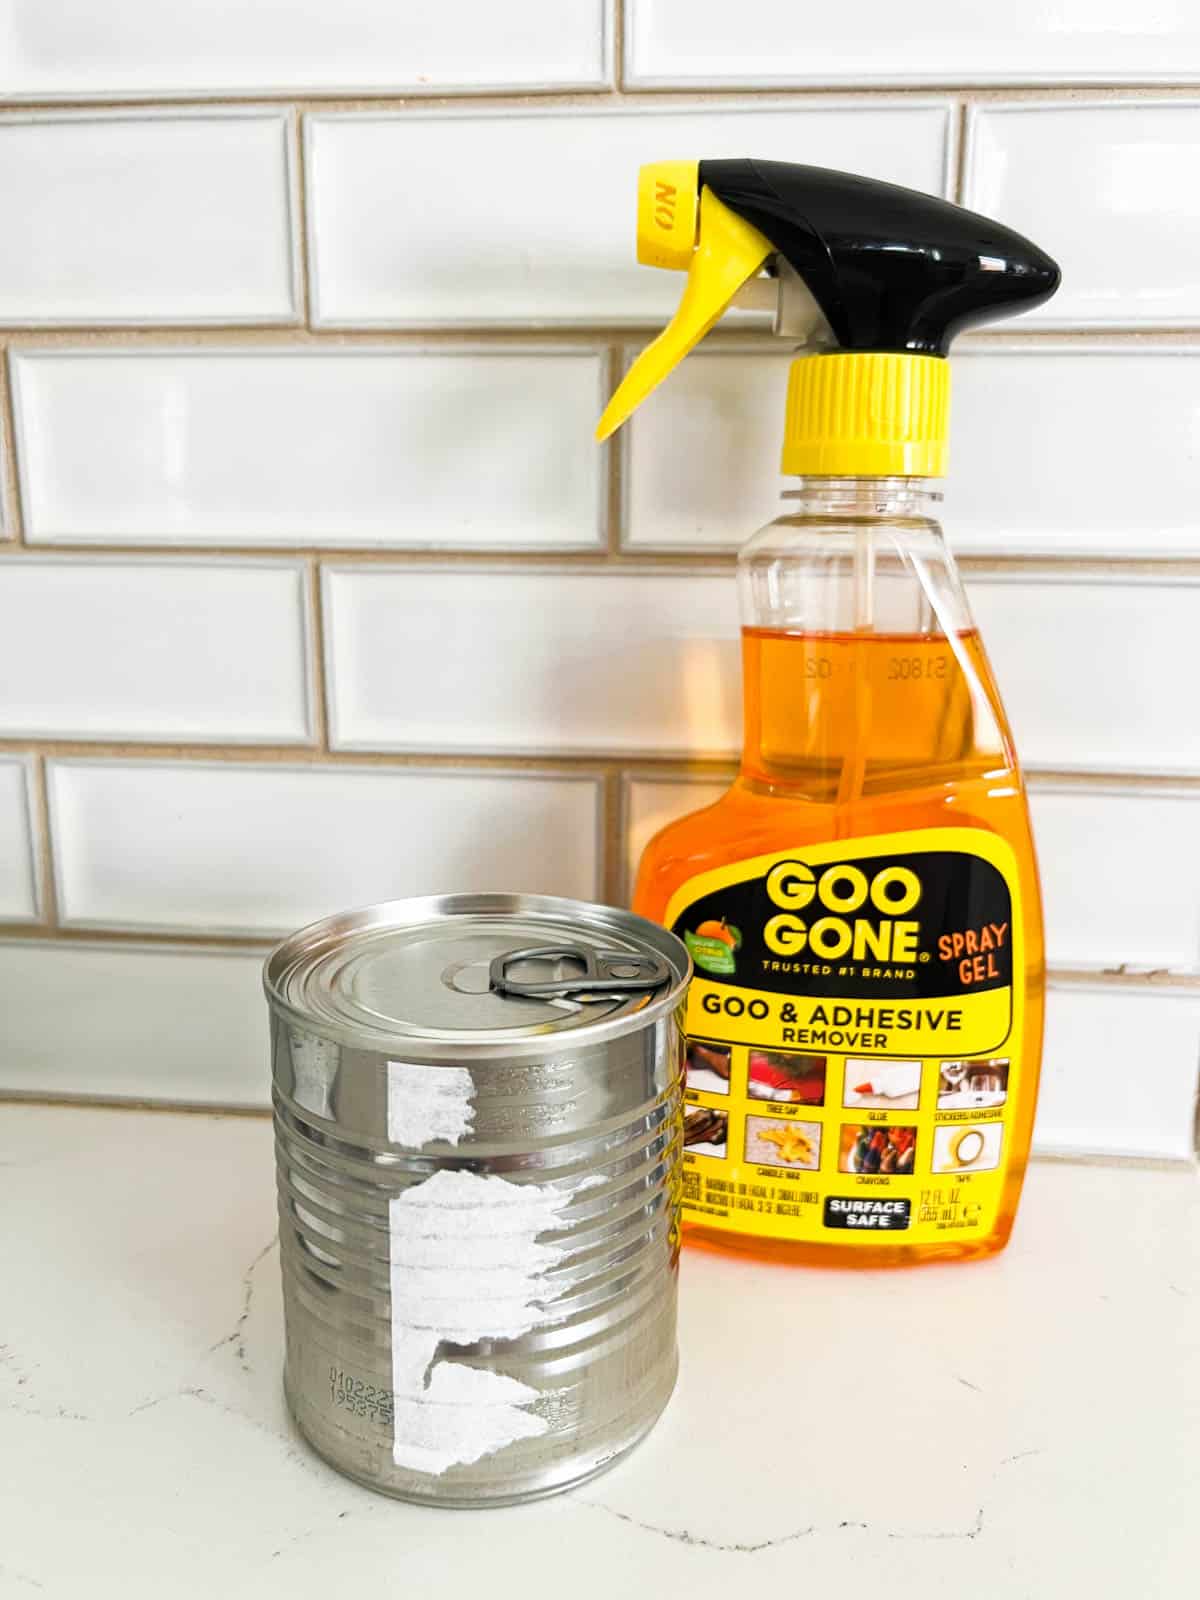 A can with a bottle of Goo Gone sitting next to it.